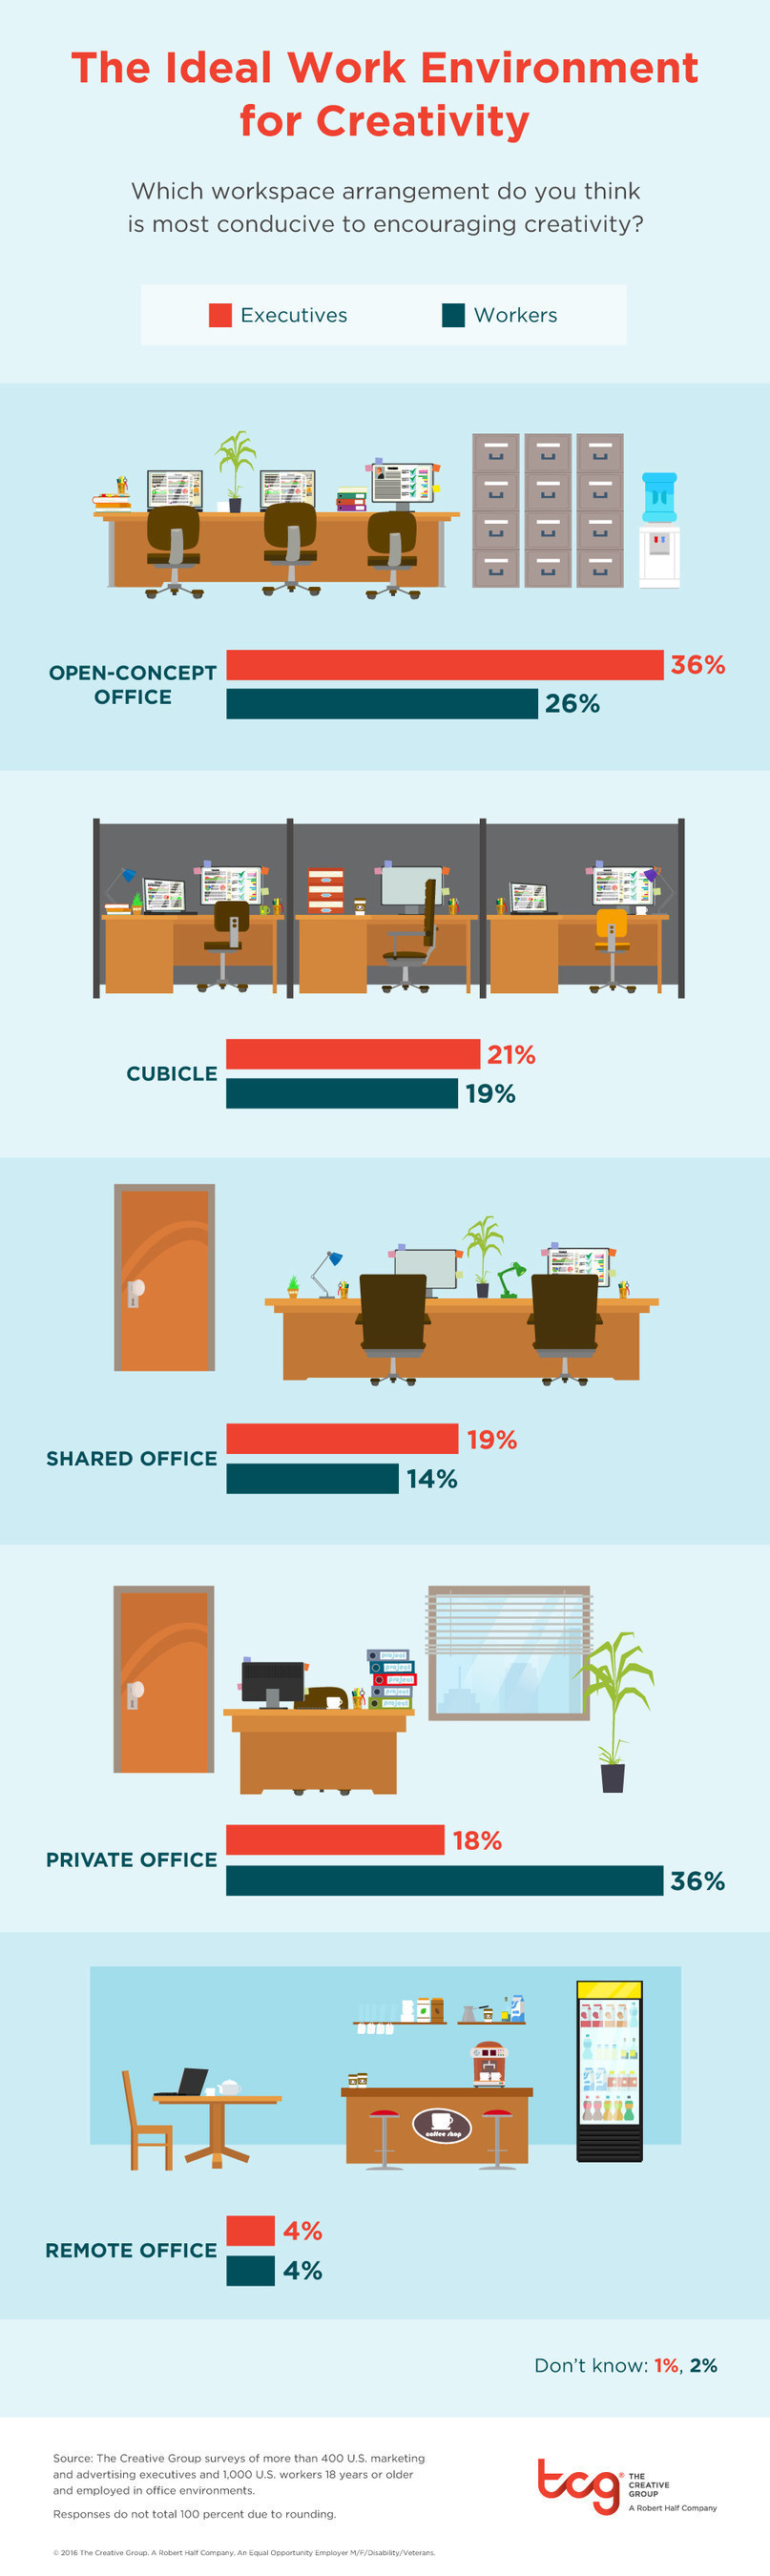 Research from The Creative Group shows executives and workers differ on ideal work environment for creativity